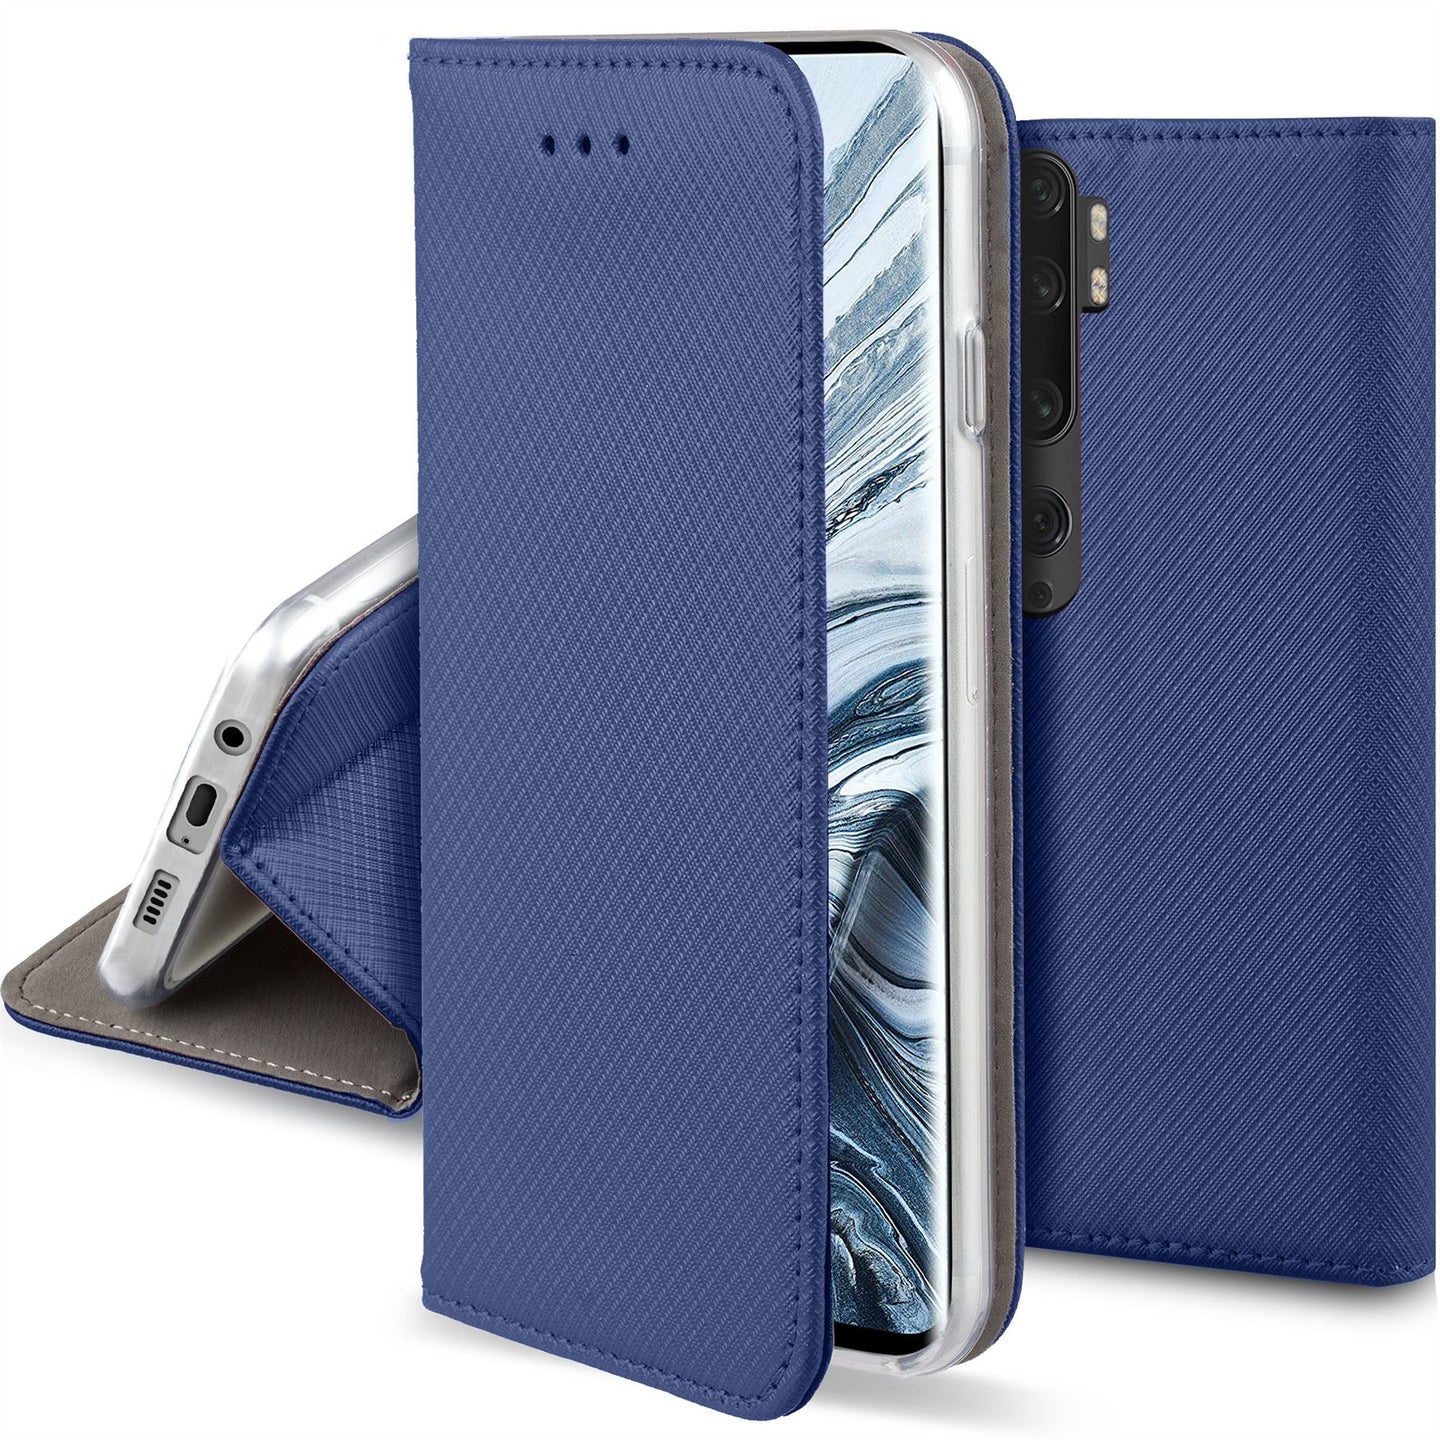 Moozy Case Flip Cover for Xiaomi Mi Note 10, Xiaomi Mi Note 10 Pro, Dark Blue - Smart Magnetic Flip Case with Card Holder and Stand